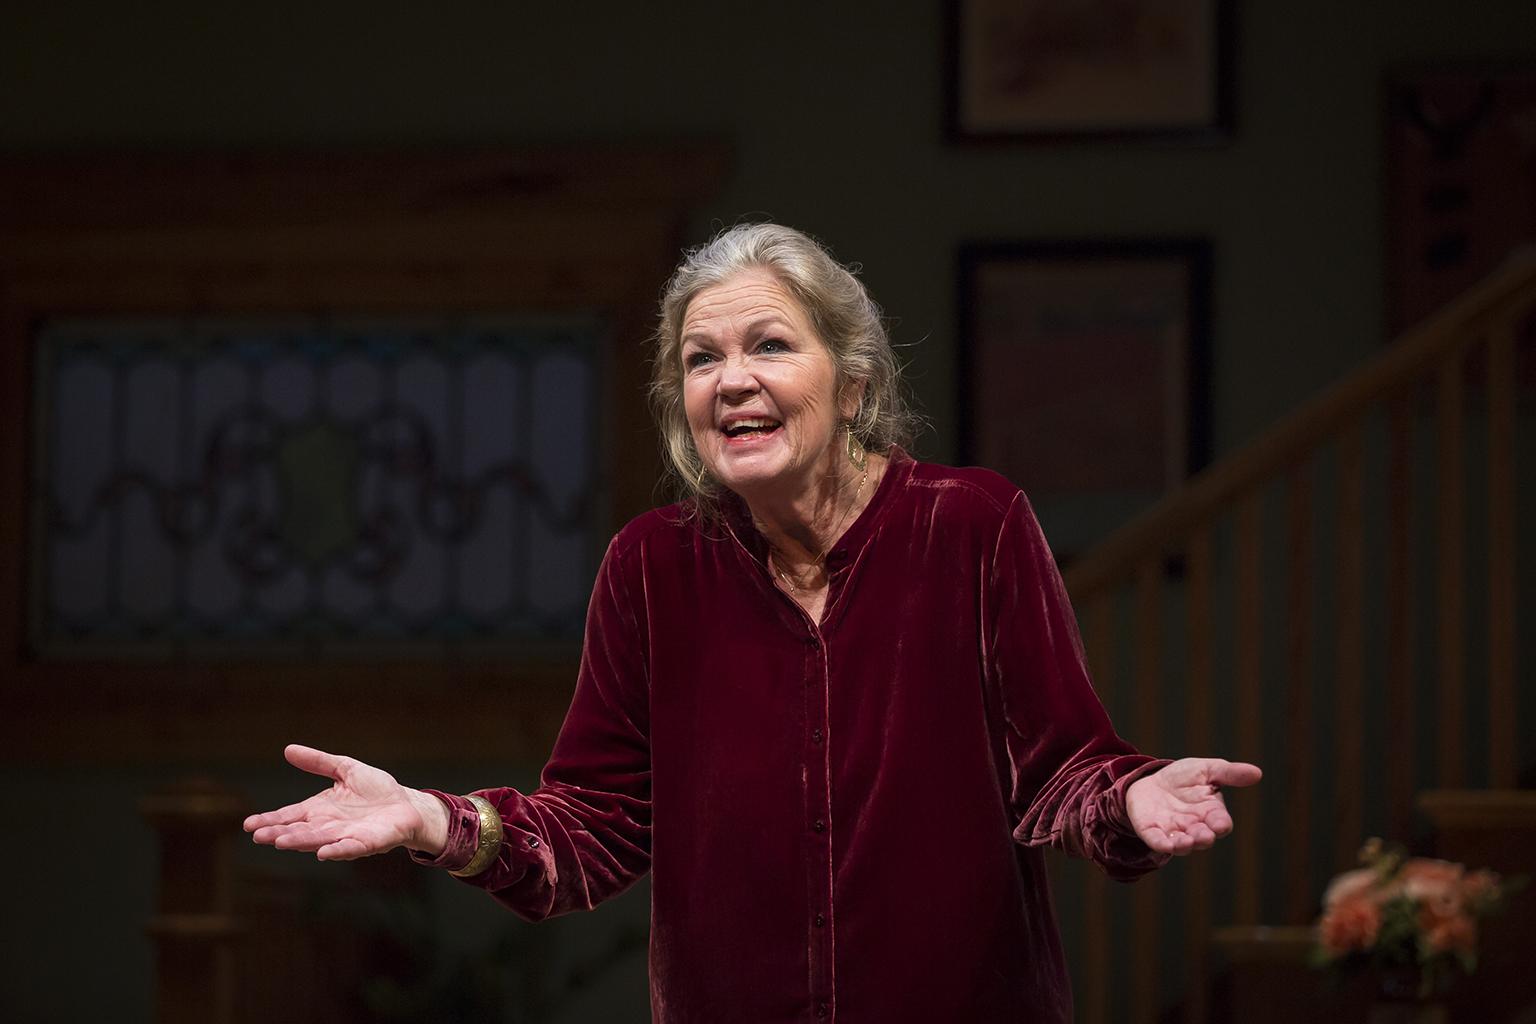 Linda Gehringer as Helene in the world premiere production of “Lady in Denmark” at Goodman Theatre. (Credit: Liz Lauren)